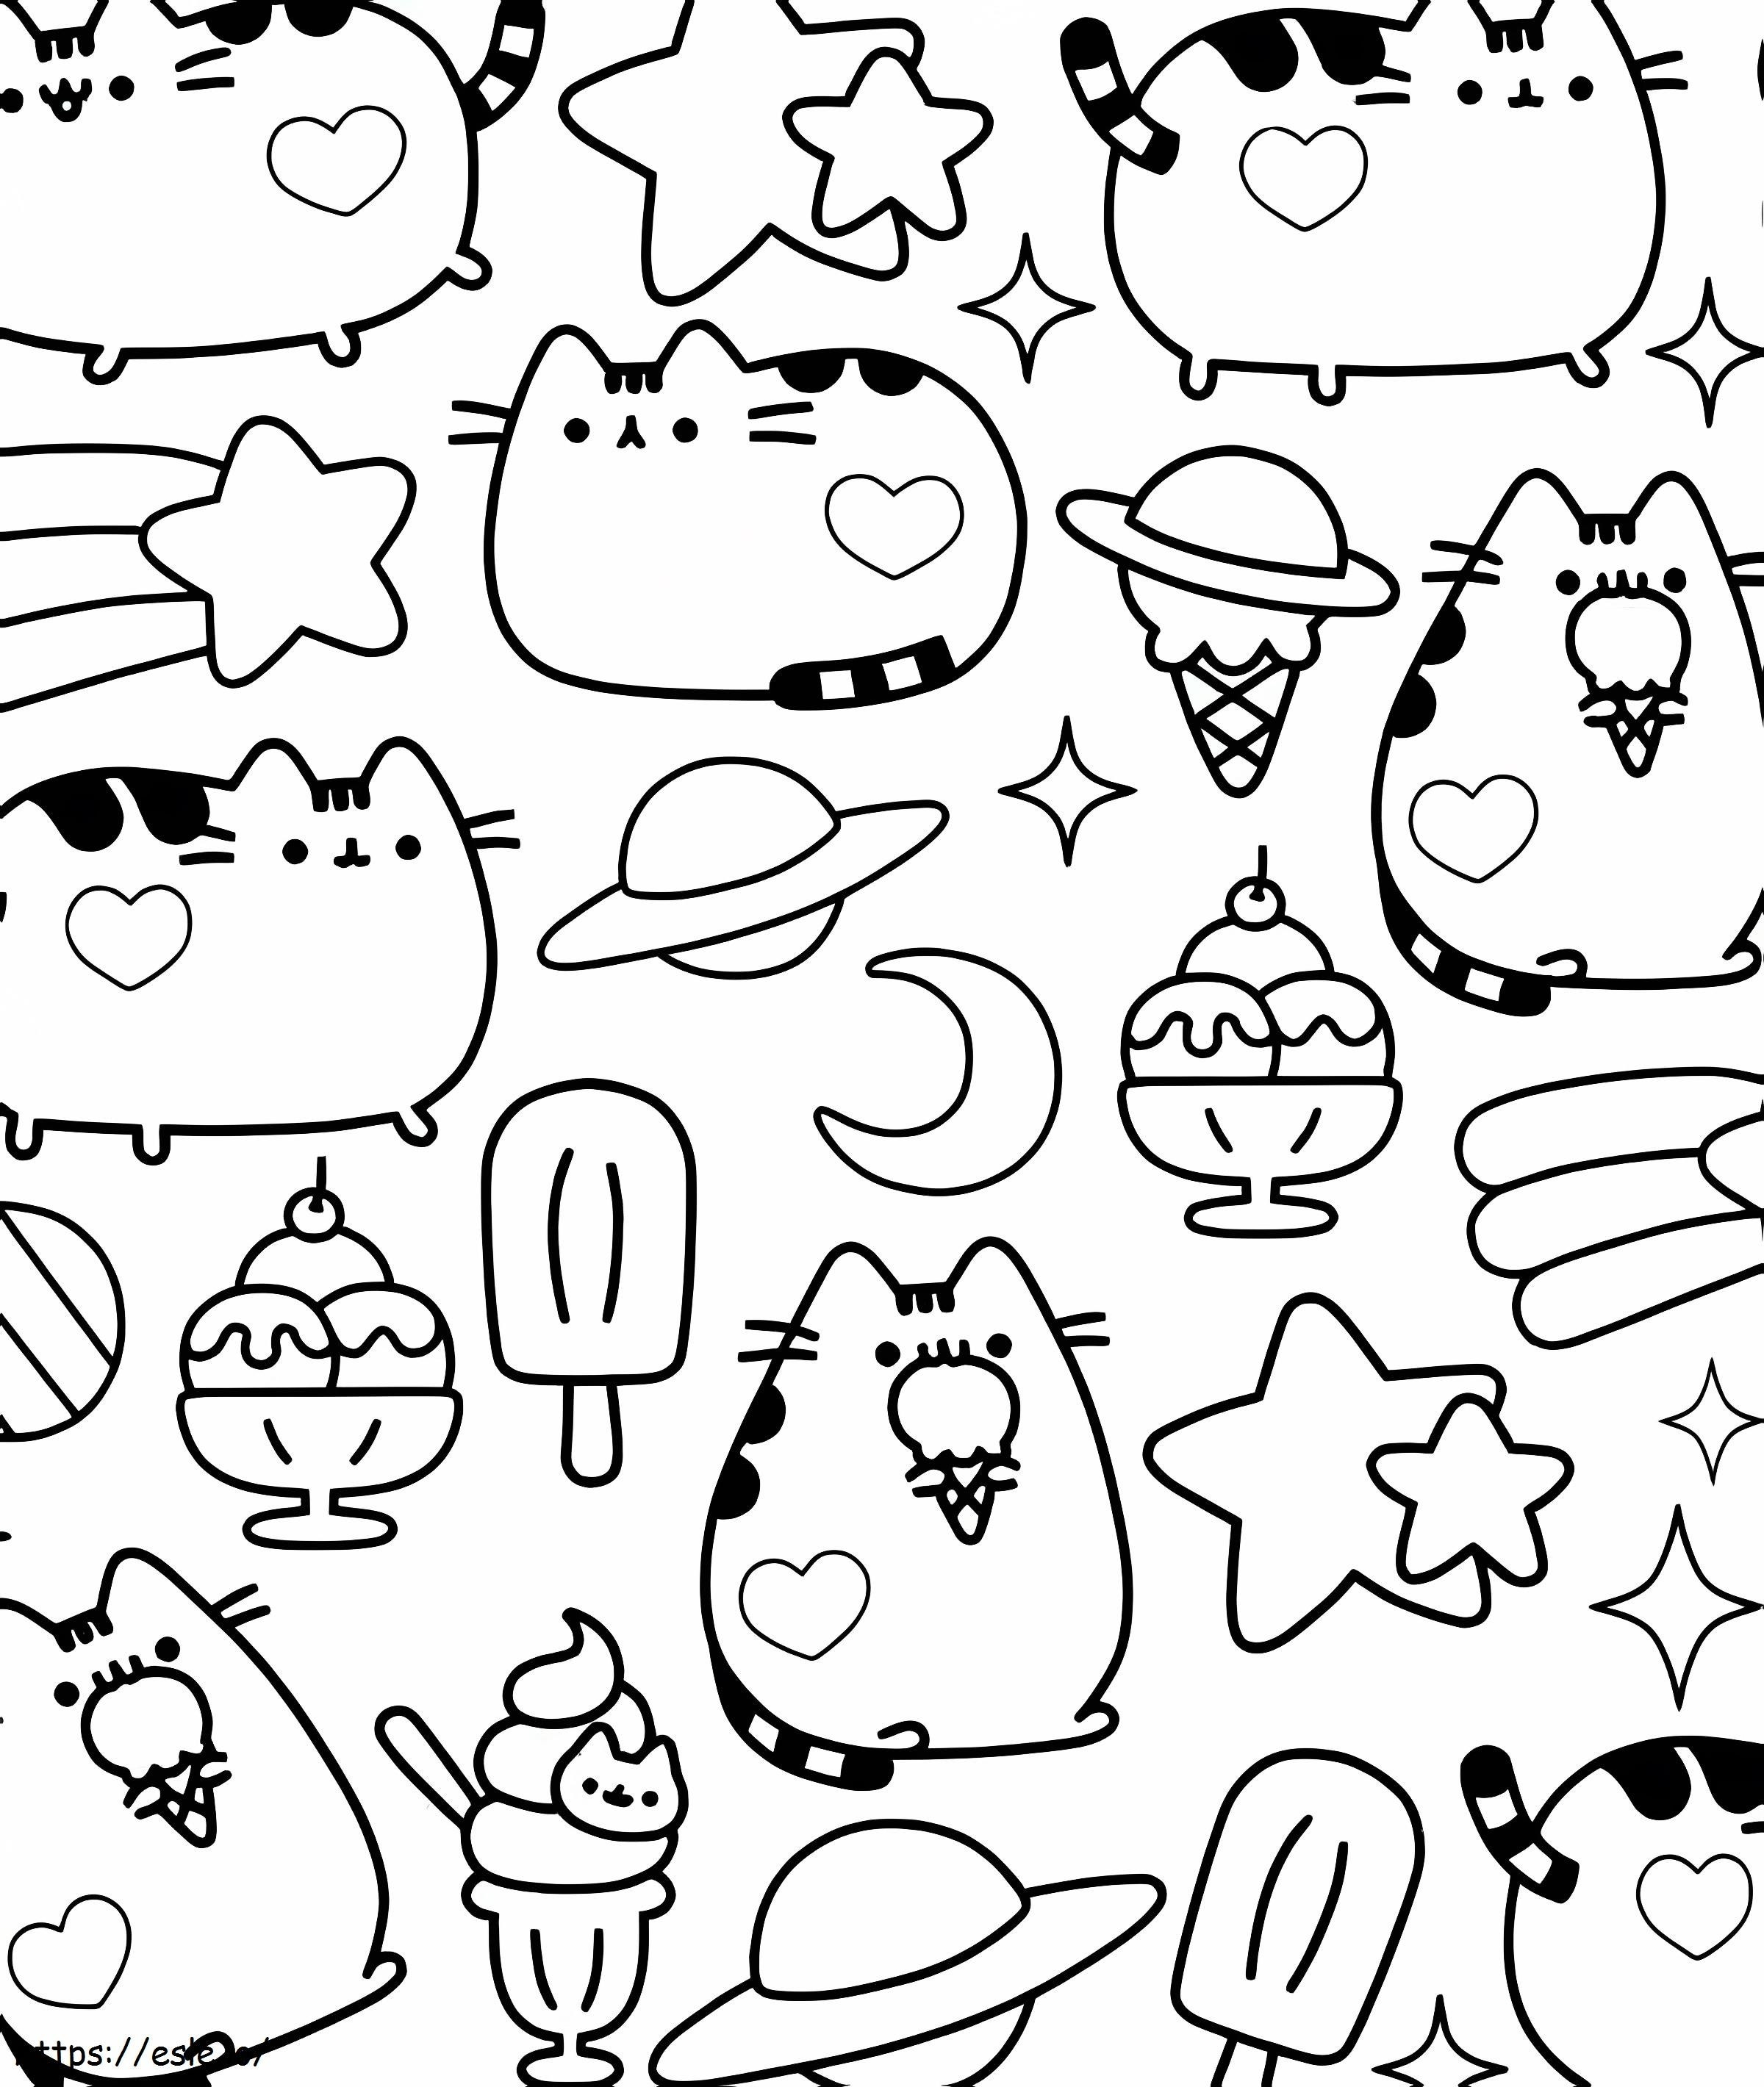 Funny Pusheen coloring page